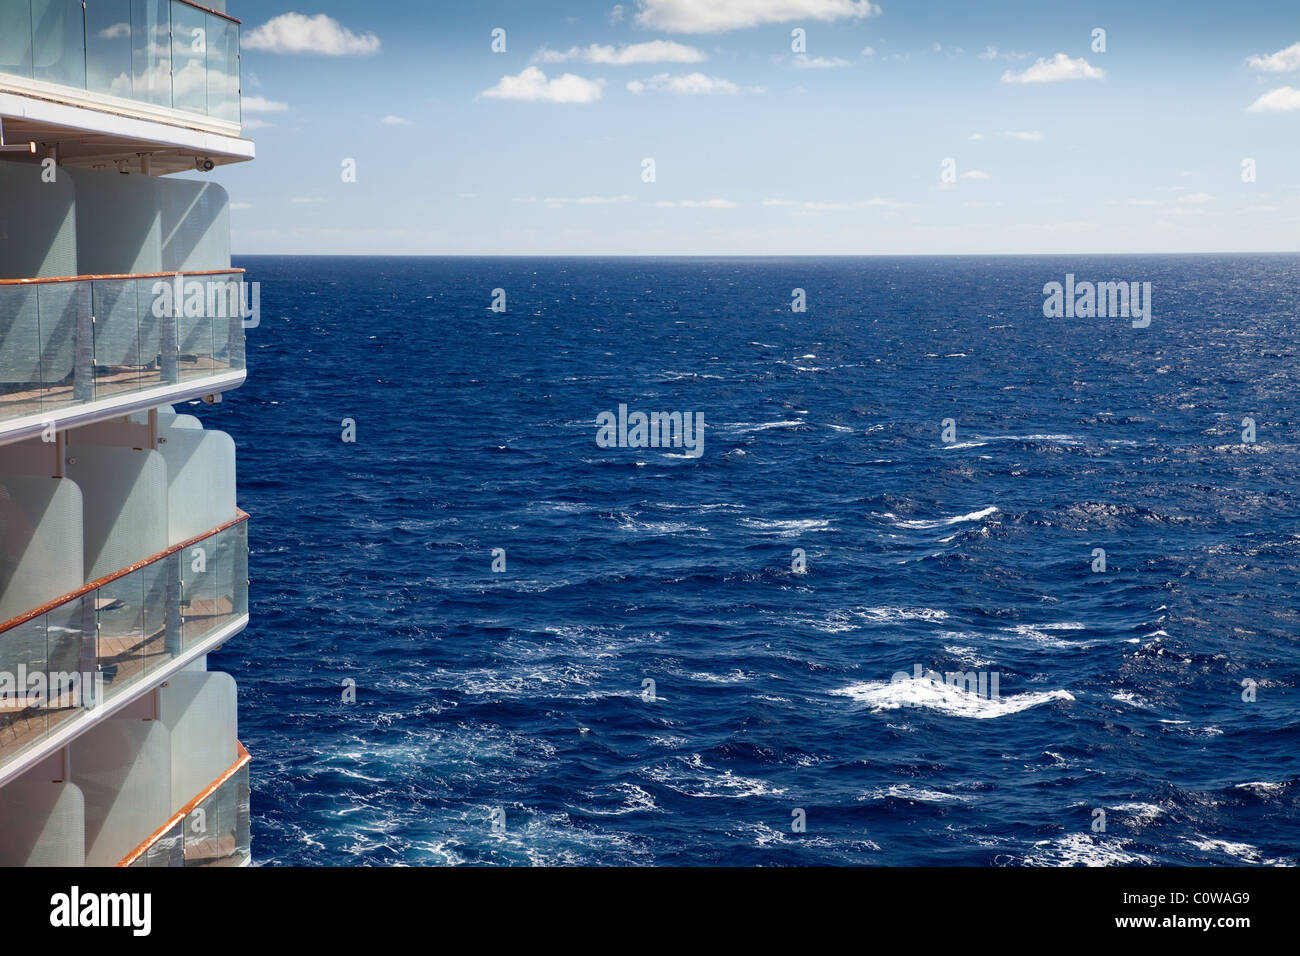 View of the Caribbean Sea from the deck of a Cruise Ship Stock Photo